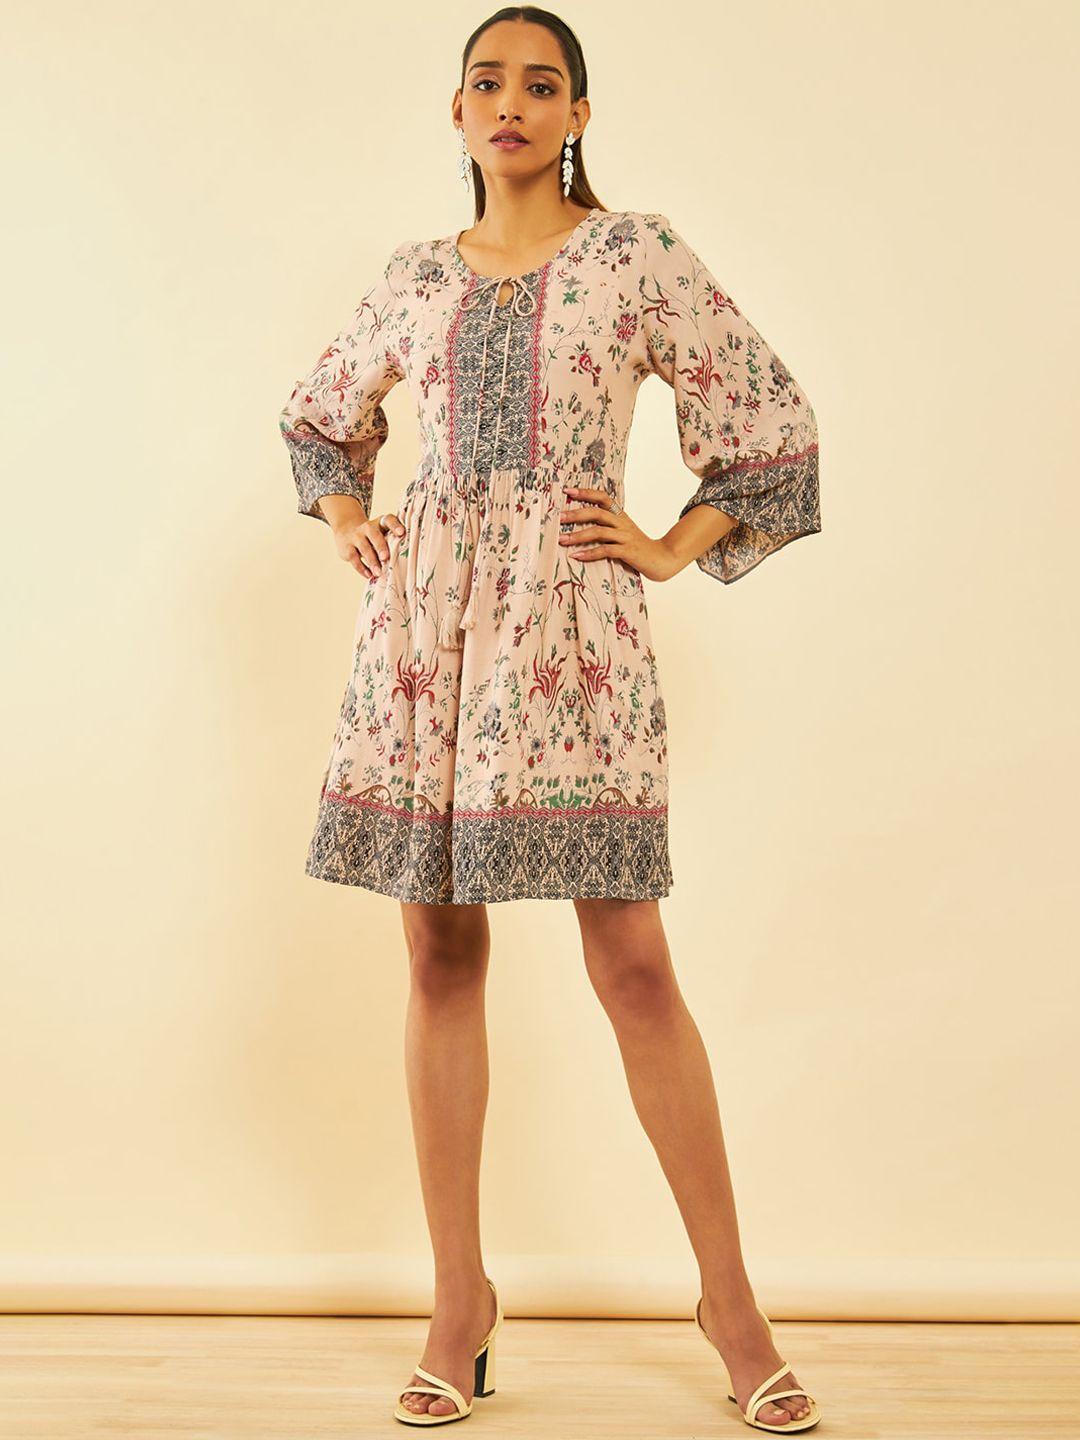 soch-floral-printed-flared-ethnic-dresses